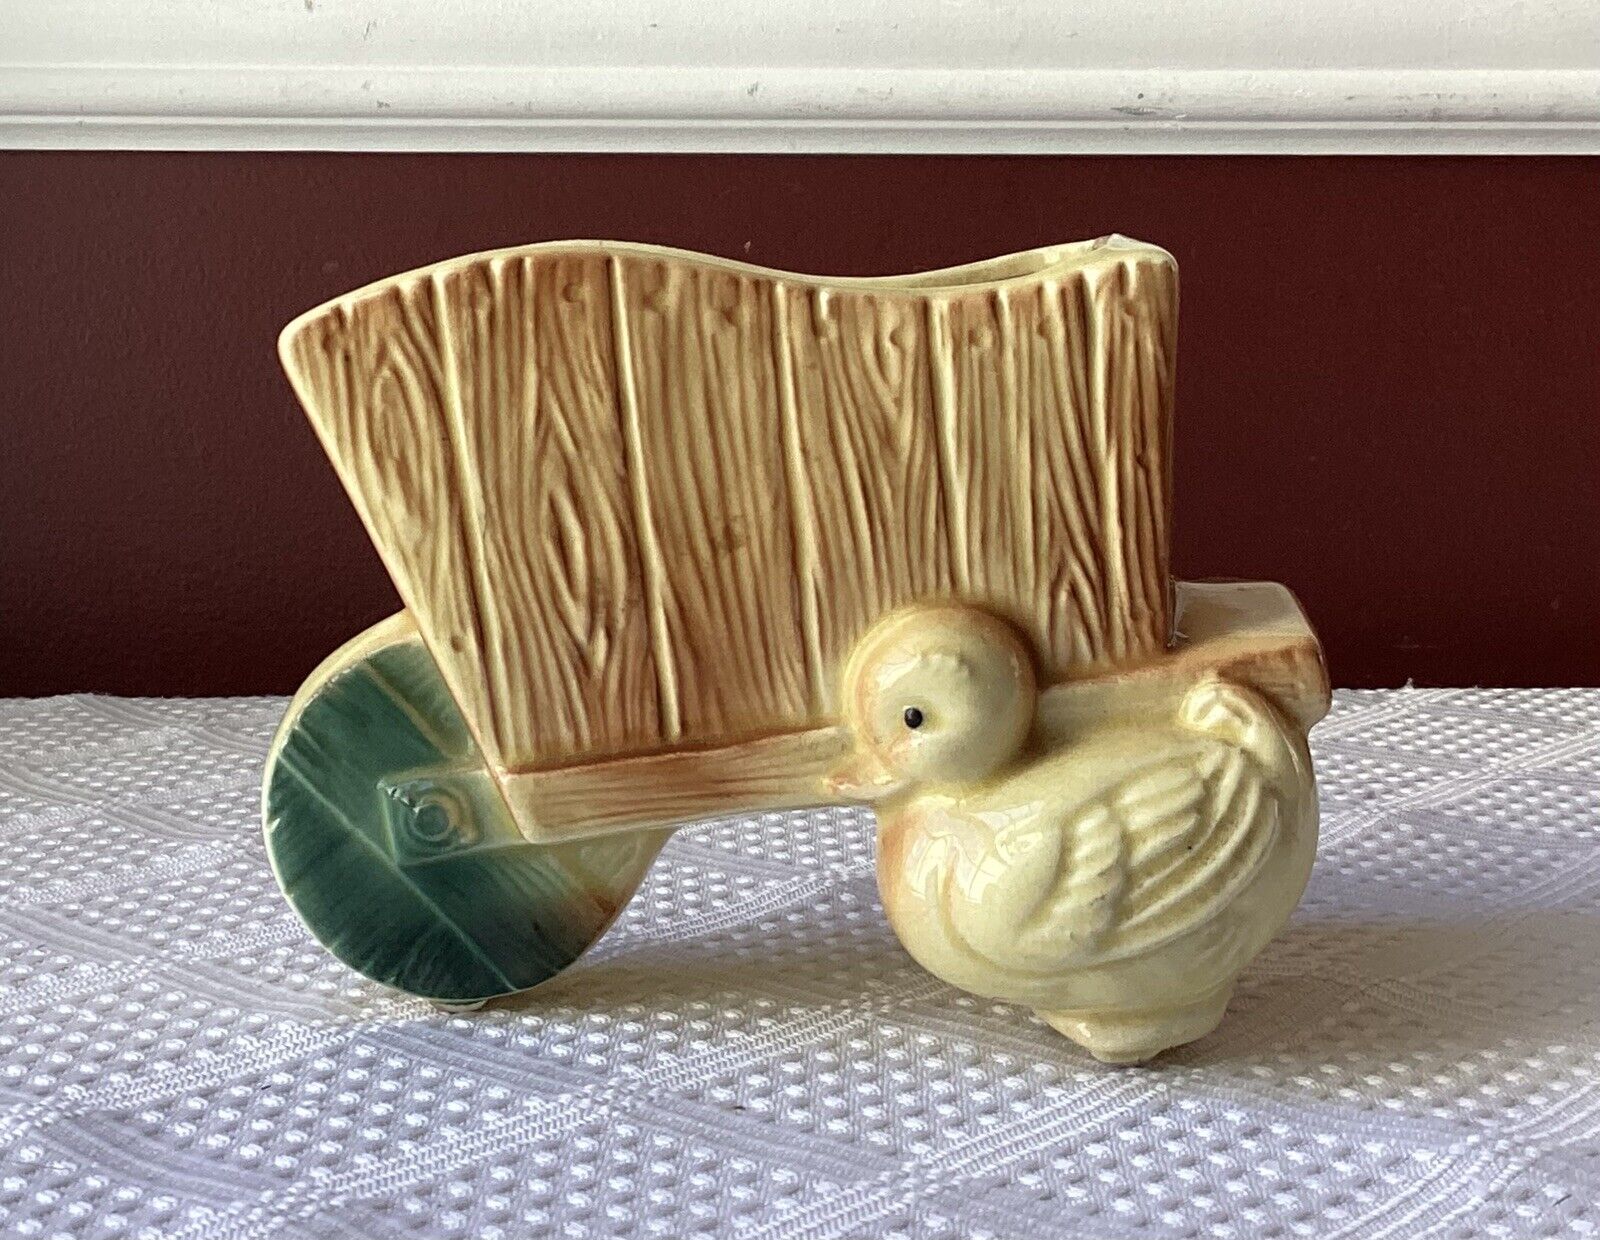 VTG Small Ceramic Pottery Planter, Duck with Wheelbarrow/ Cart Planter, Unmarked